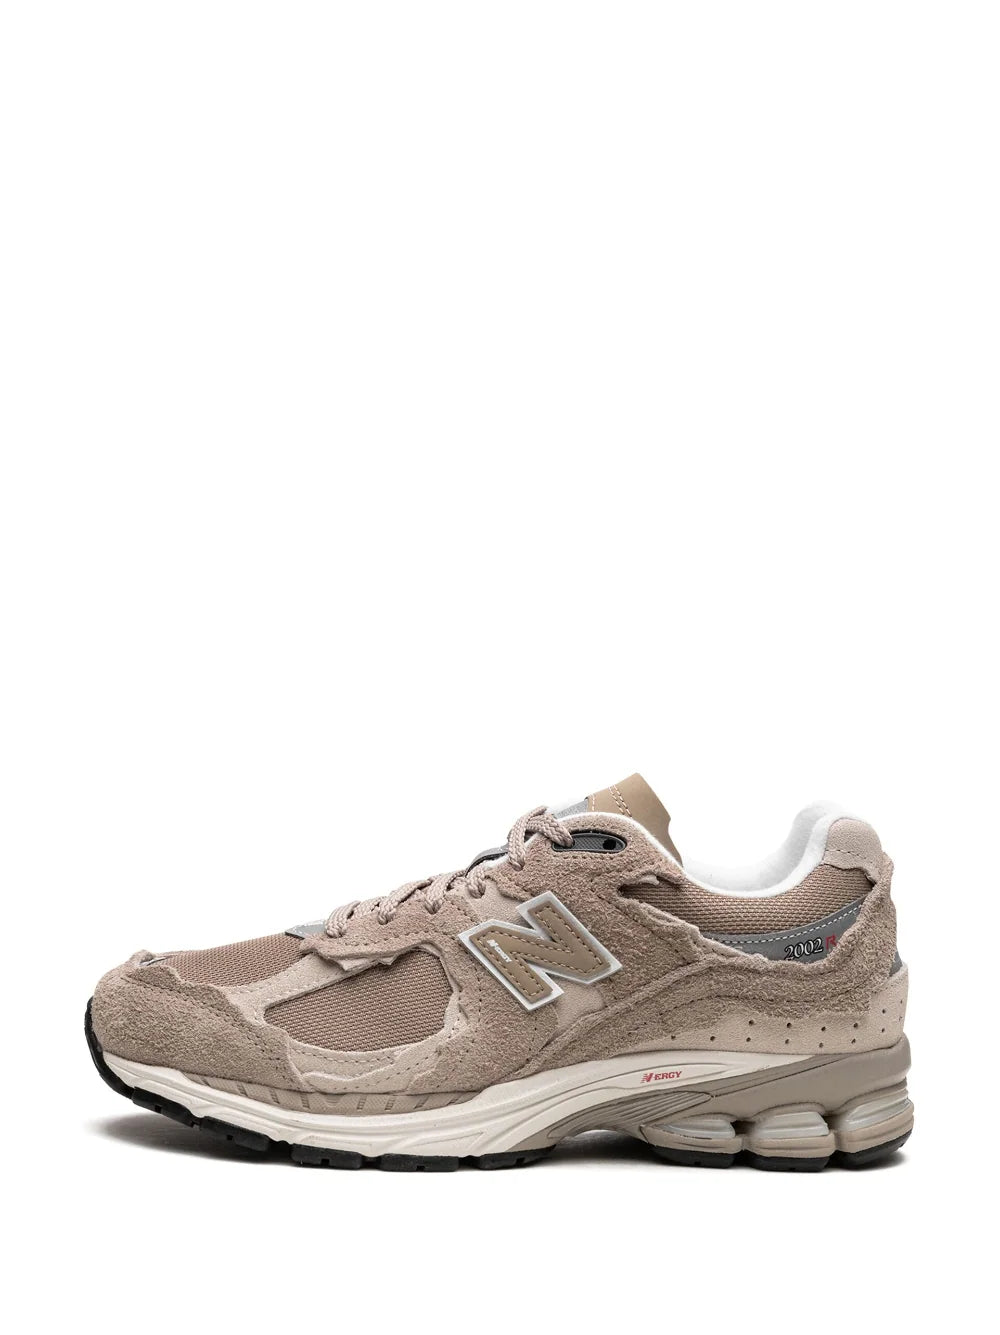 NEW BALANCE - 2002R PROTECTION PACK DRIFTWOOD